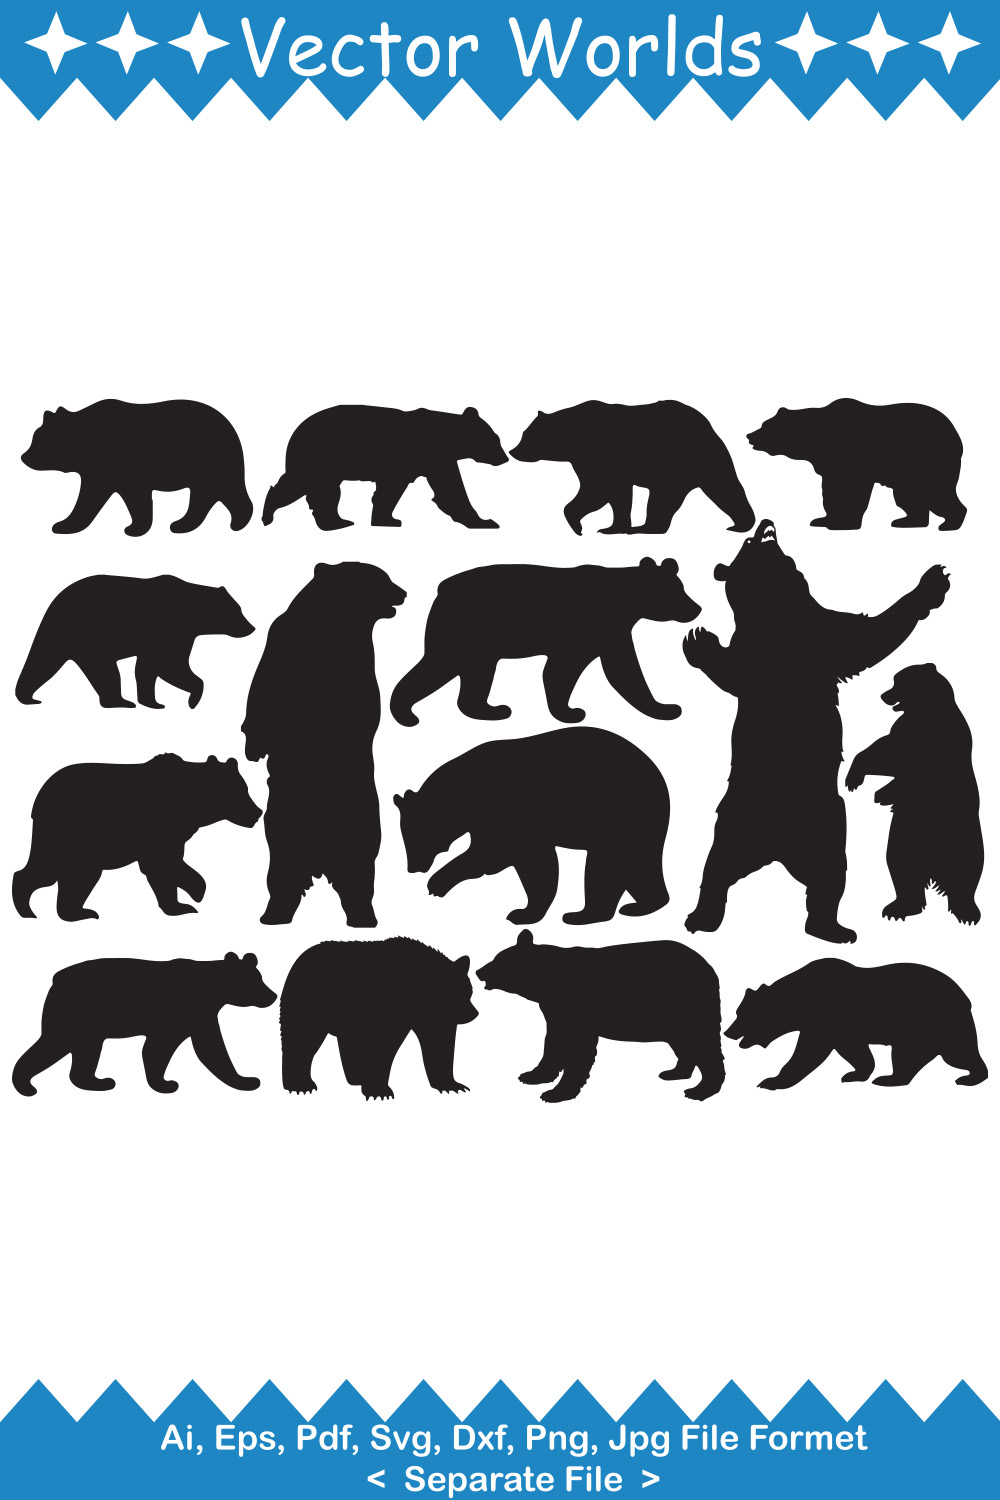 Picture of a bear silhouettes on a white background.